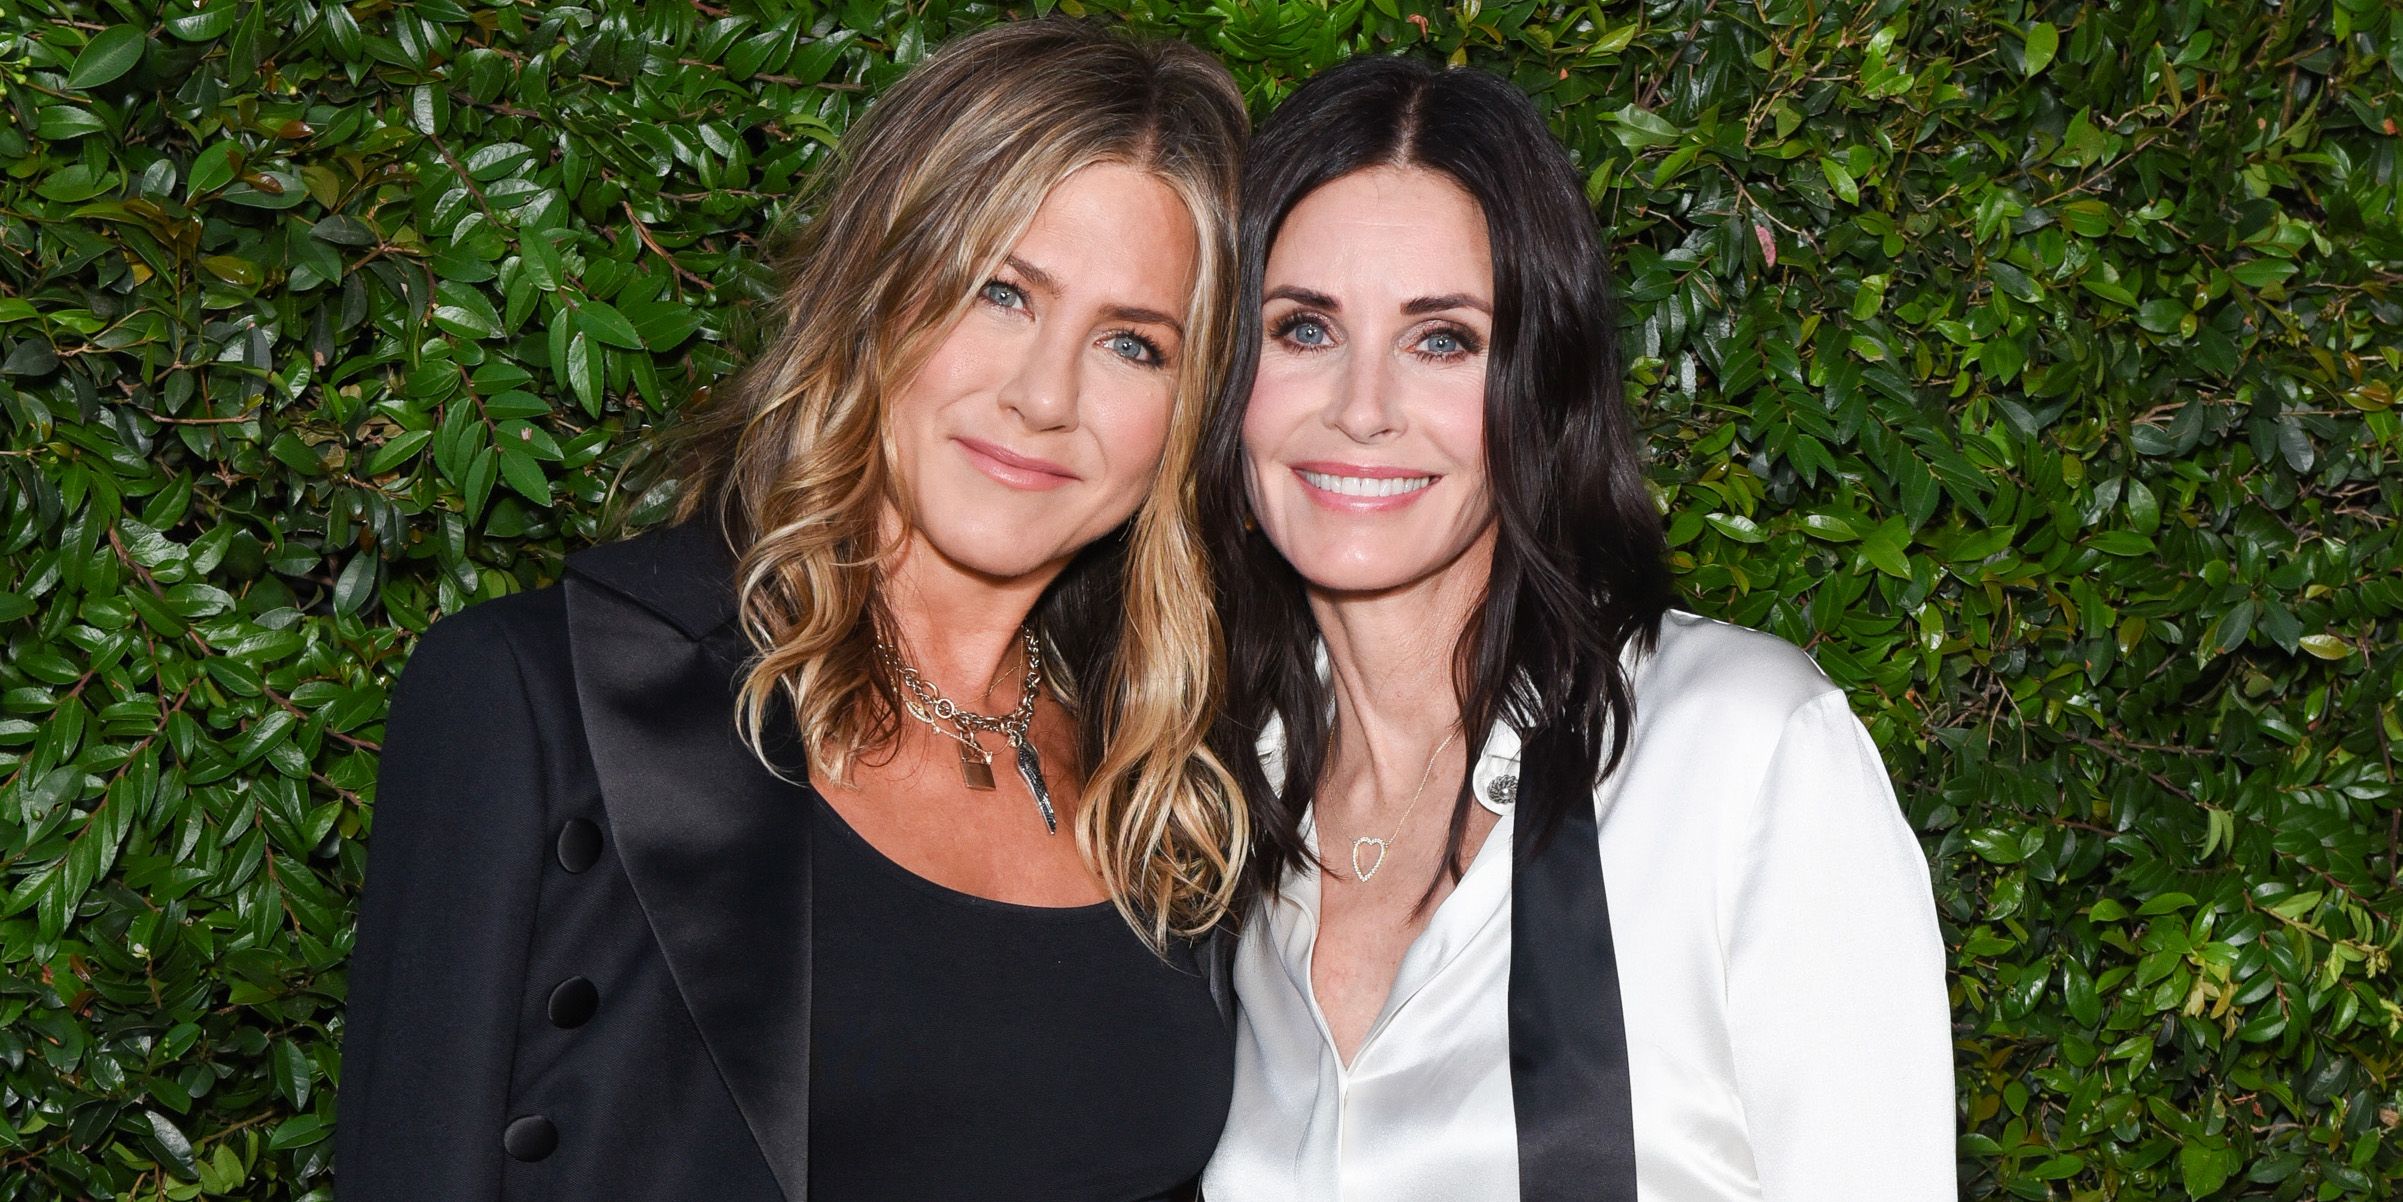 Jennifer Aniston And Courteney Cox: The Friends Stars Most Adorable BFF  Moments